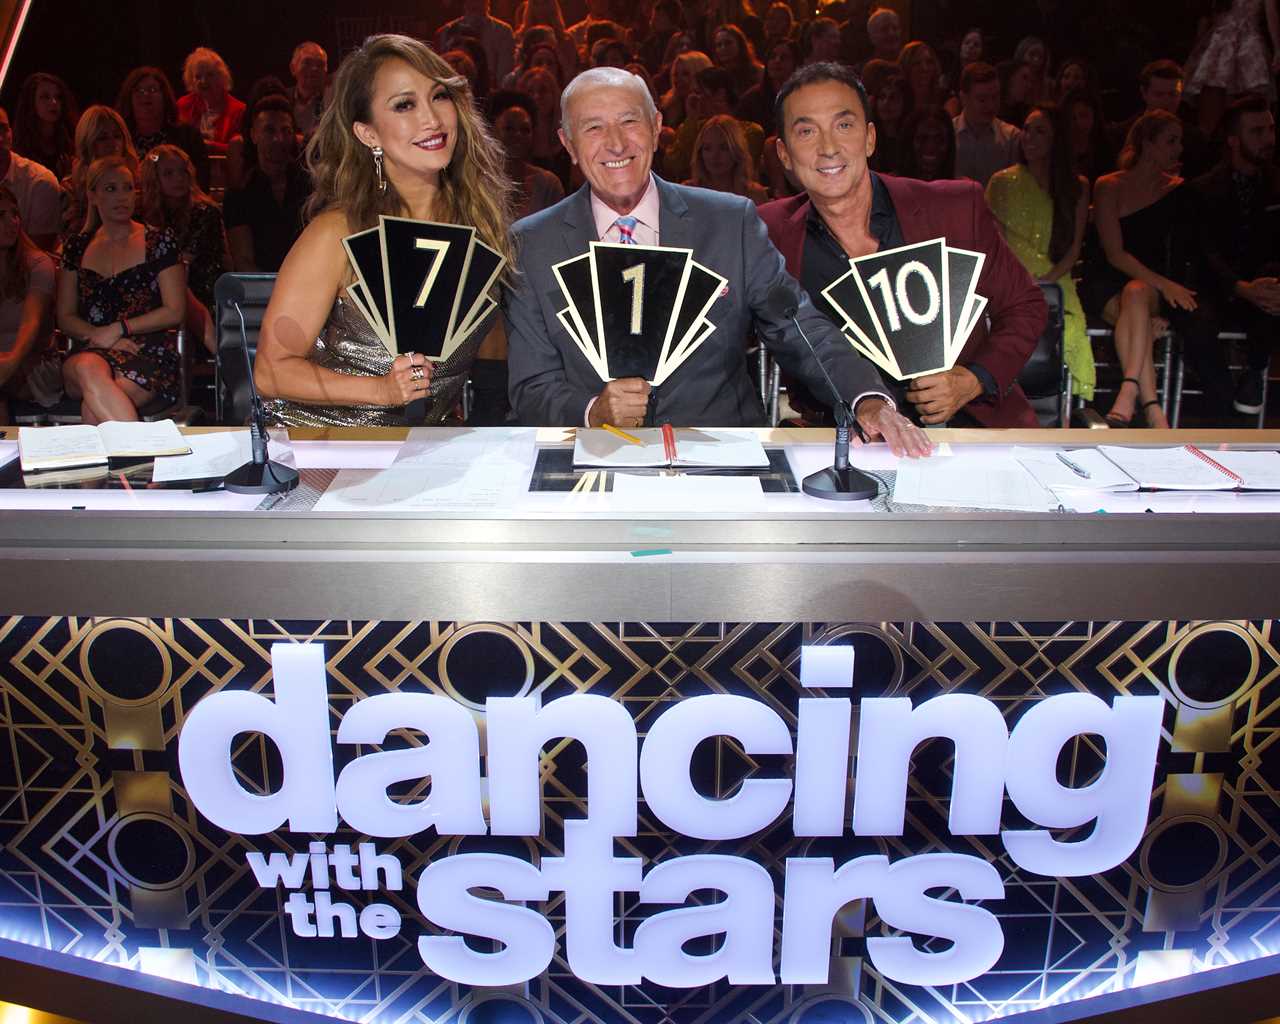 Len Goodman’s DWTS crew was ‘kept in the dark’ about late judge’s cancer battle during his final season